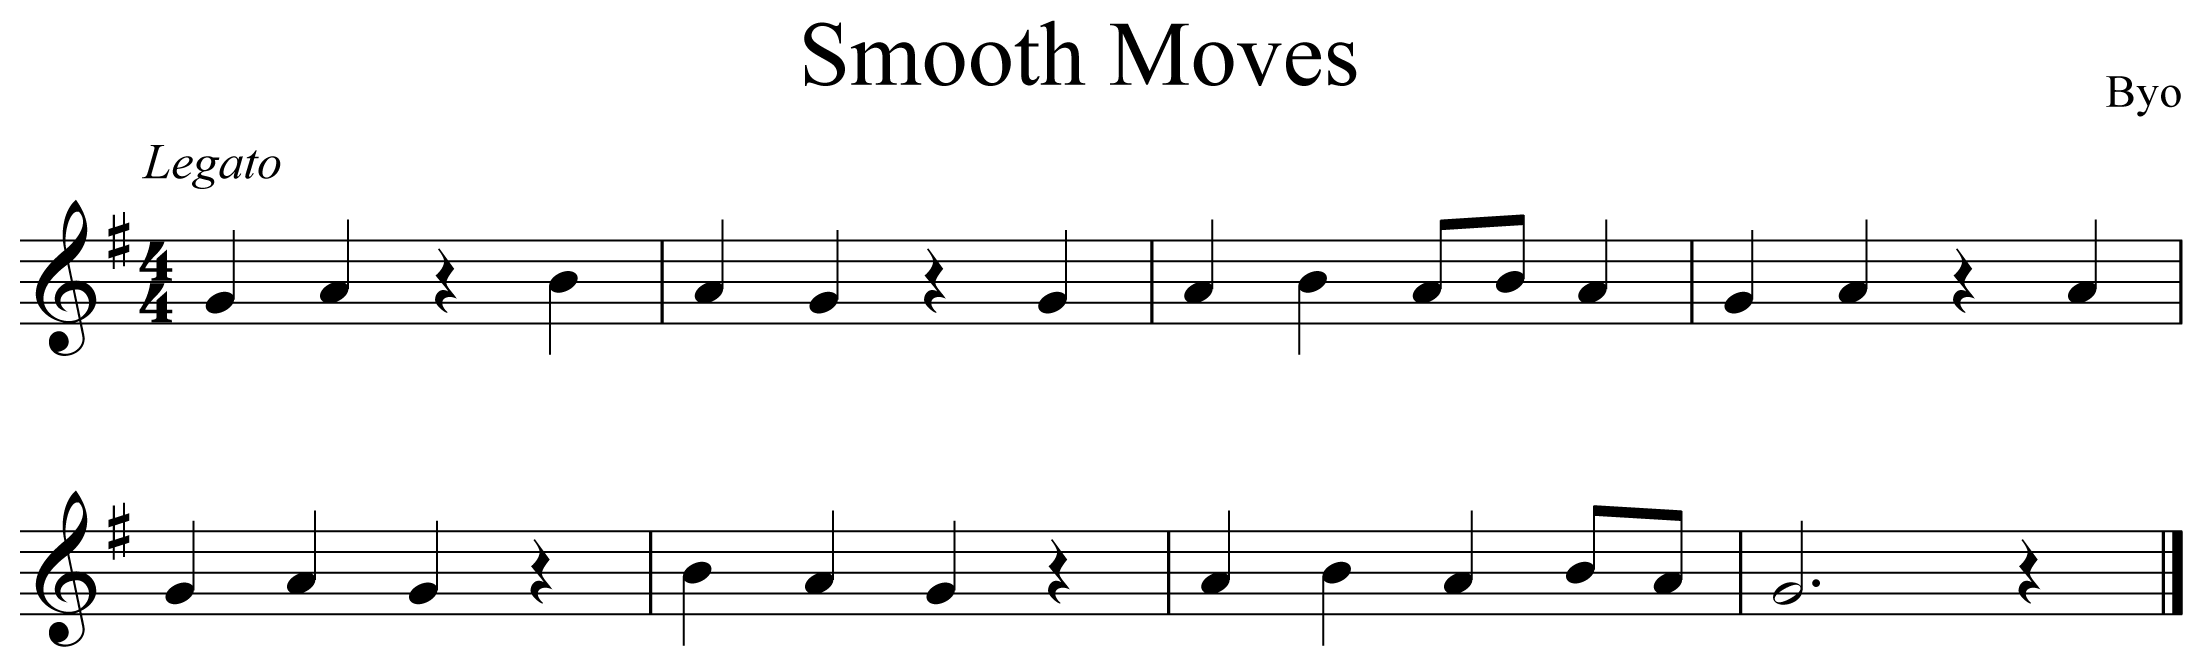 Smooth Moves Music Notation Trumpet